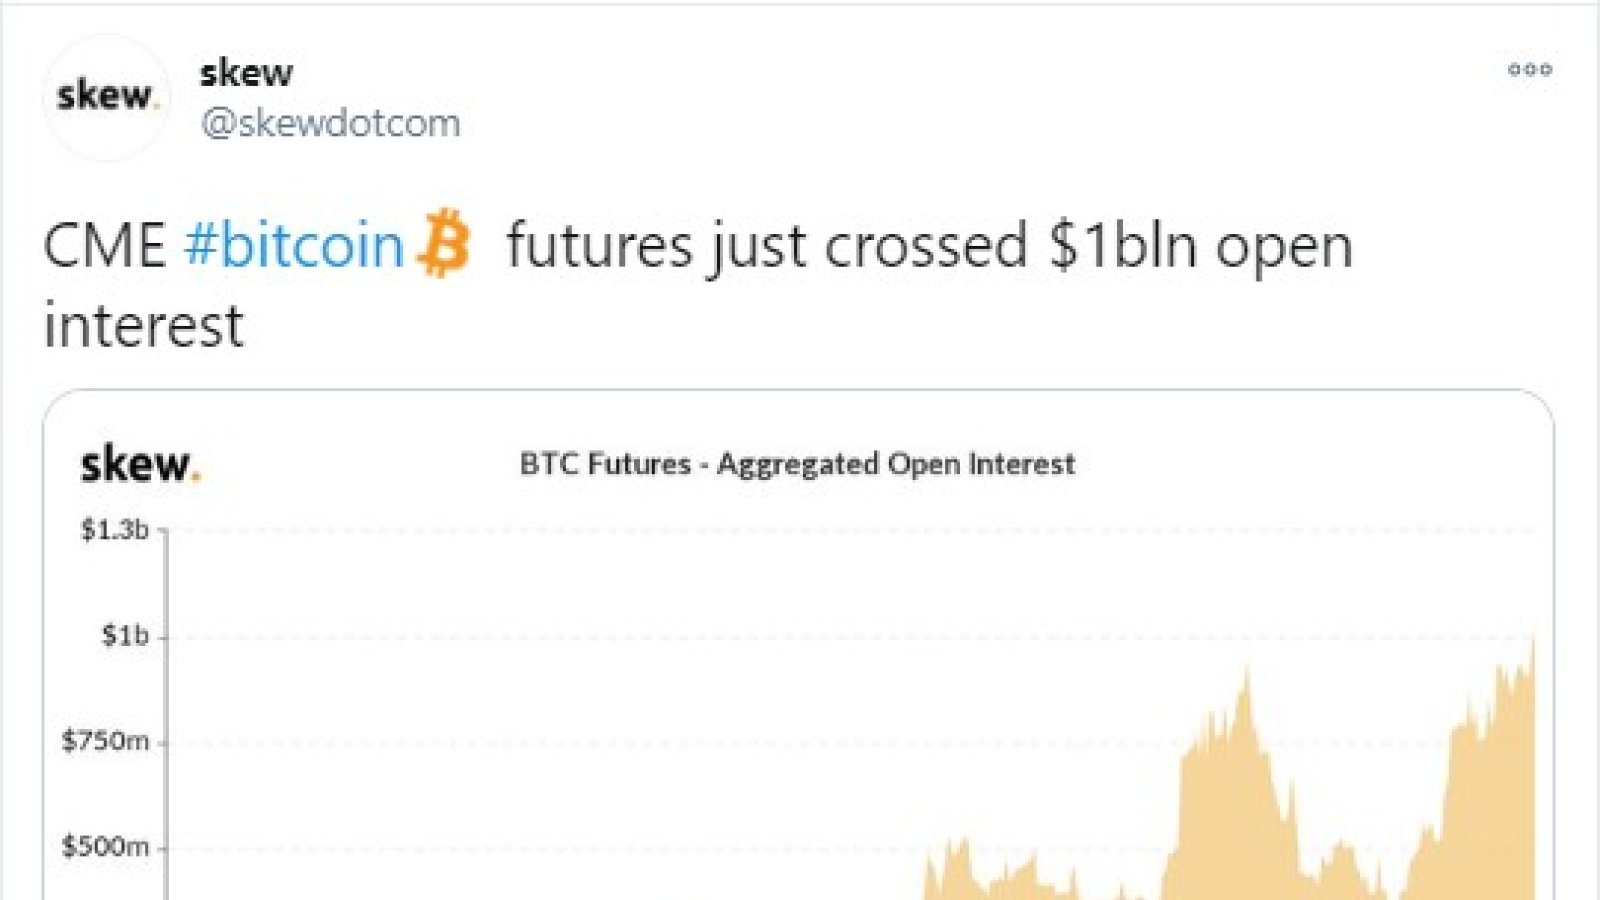 What is futures